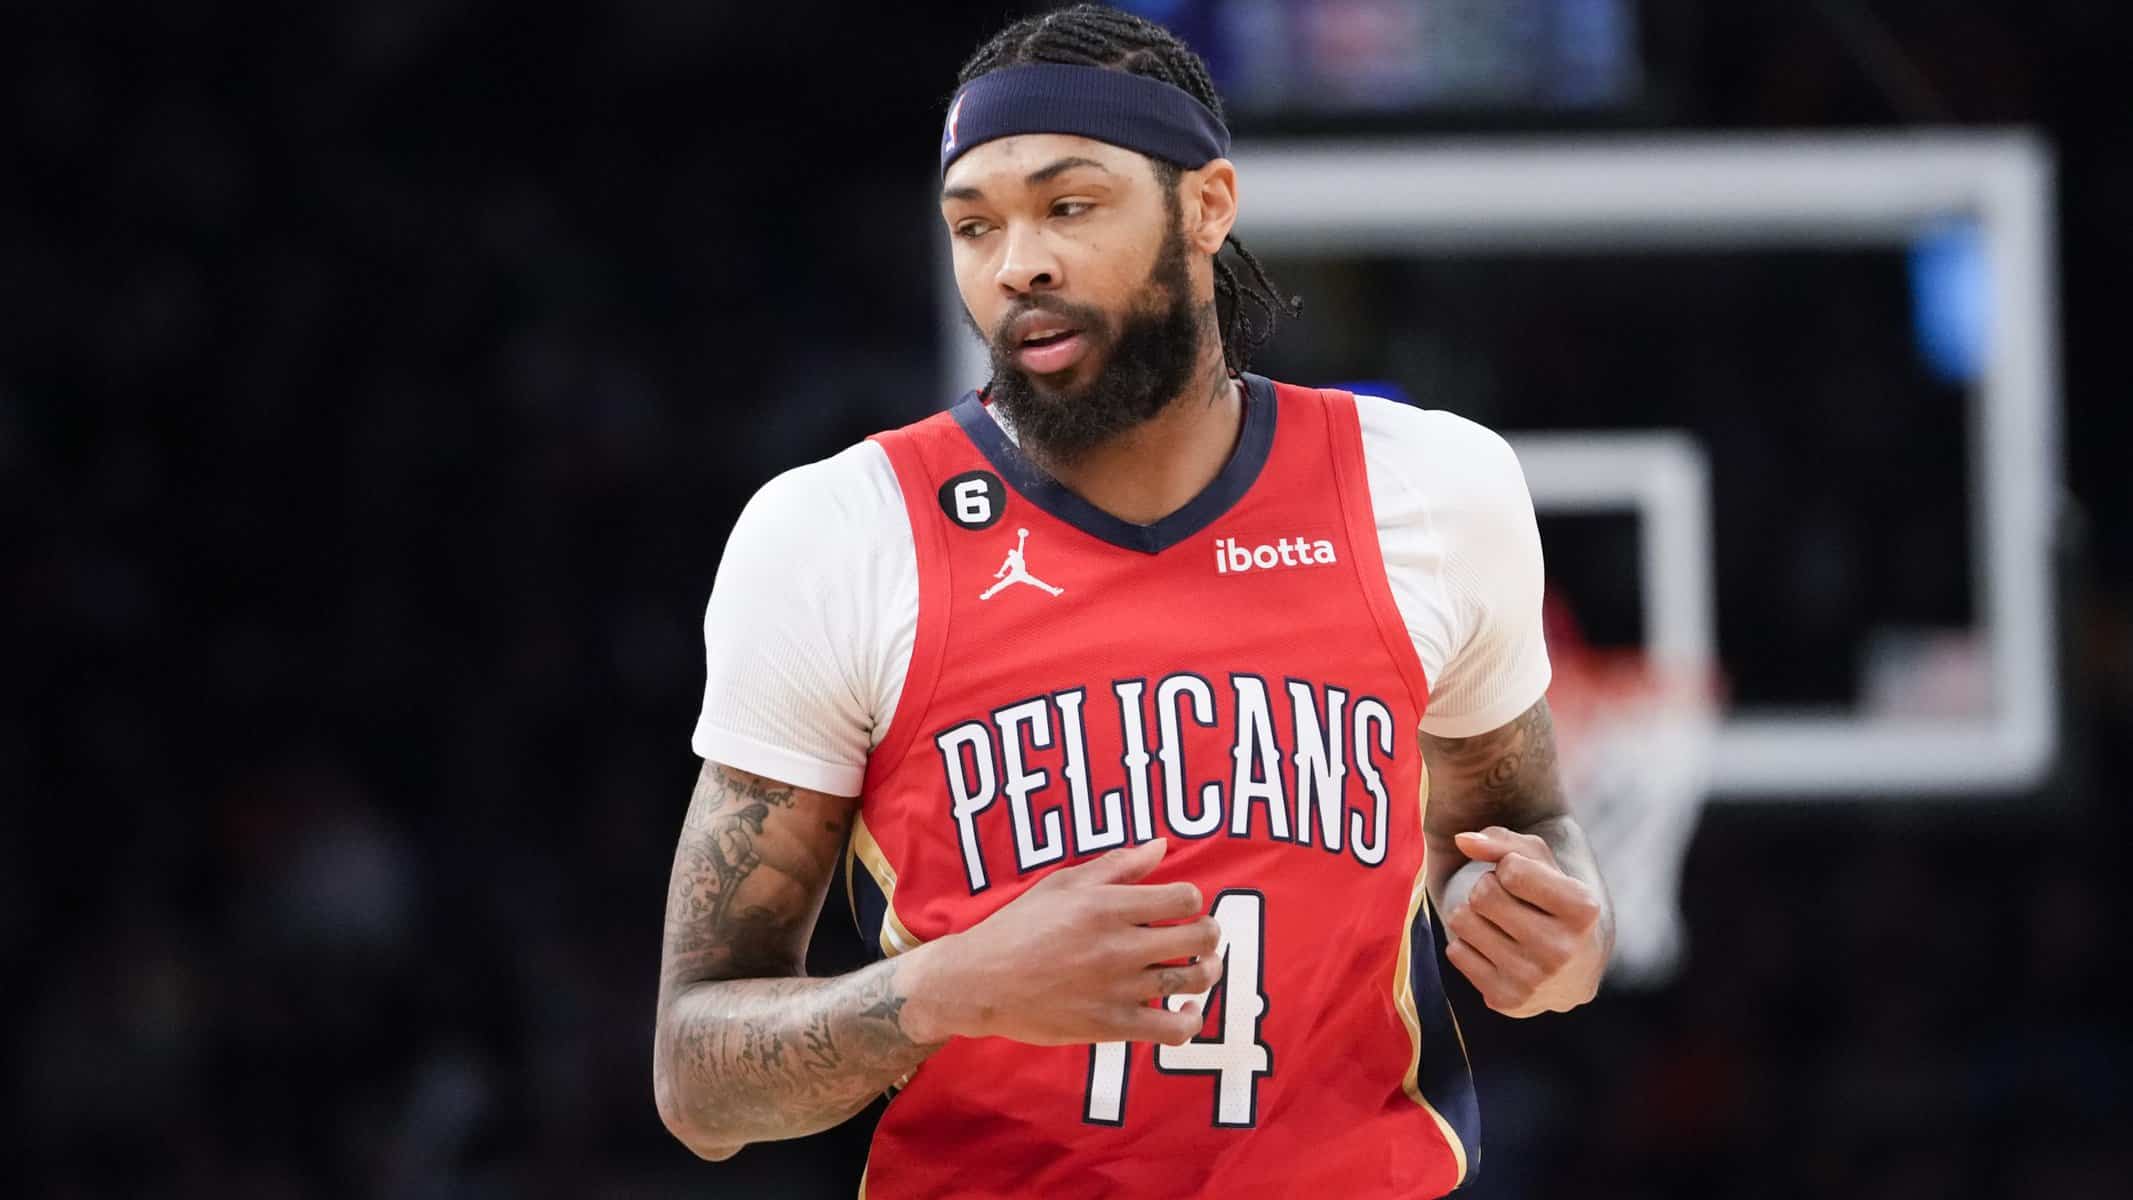 NBA DFS Contrarian Picks Today: Look to Pelicans for Different Value (Feb. 25)